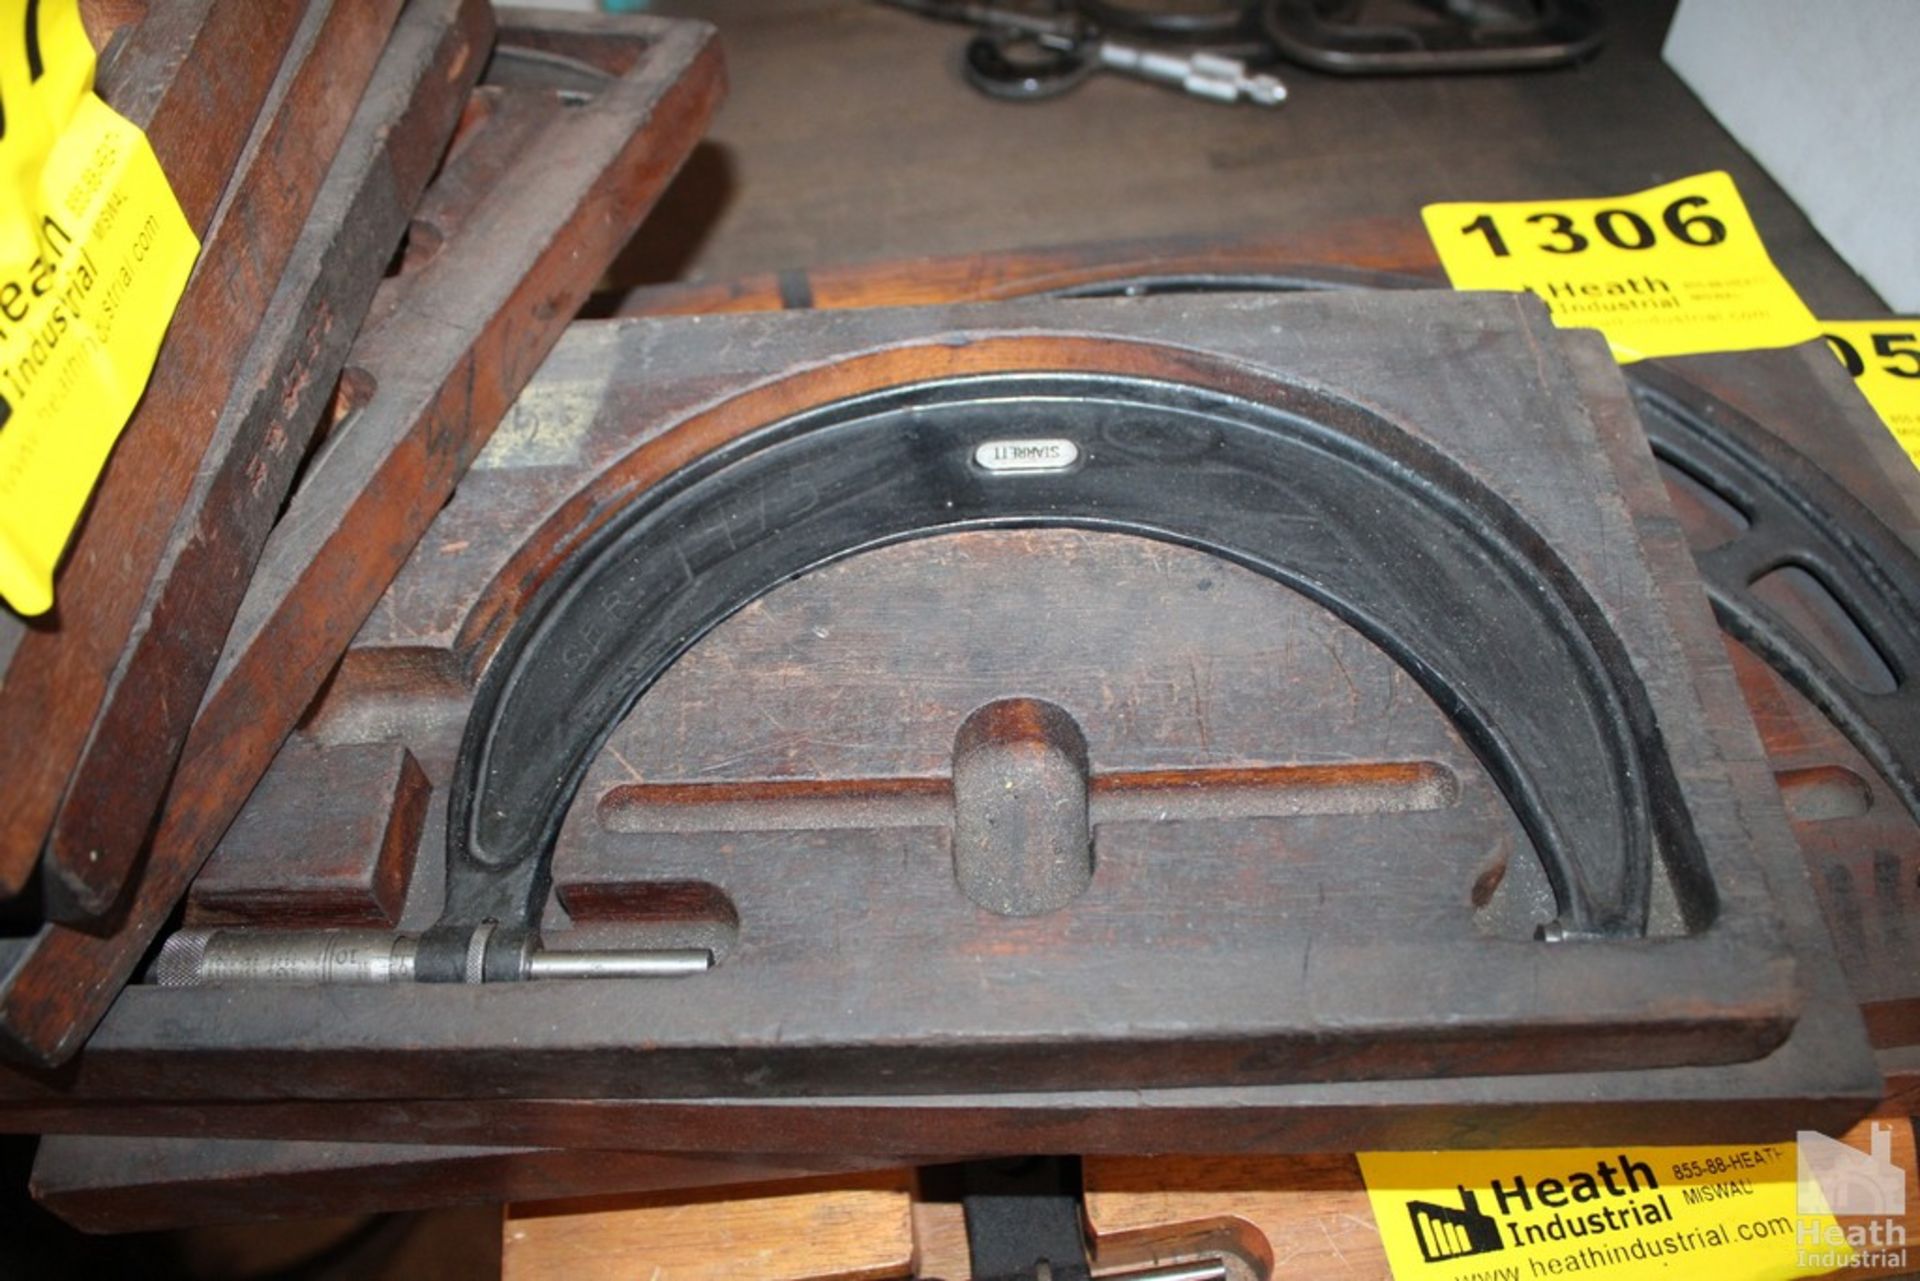 SIX PIECE MICROMETER SET 7"-8" TO 3"-4" (FIVE ARE STARRETT, ONE IS BROWN & SHARPE) - Image 4 of 4